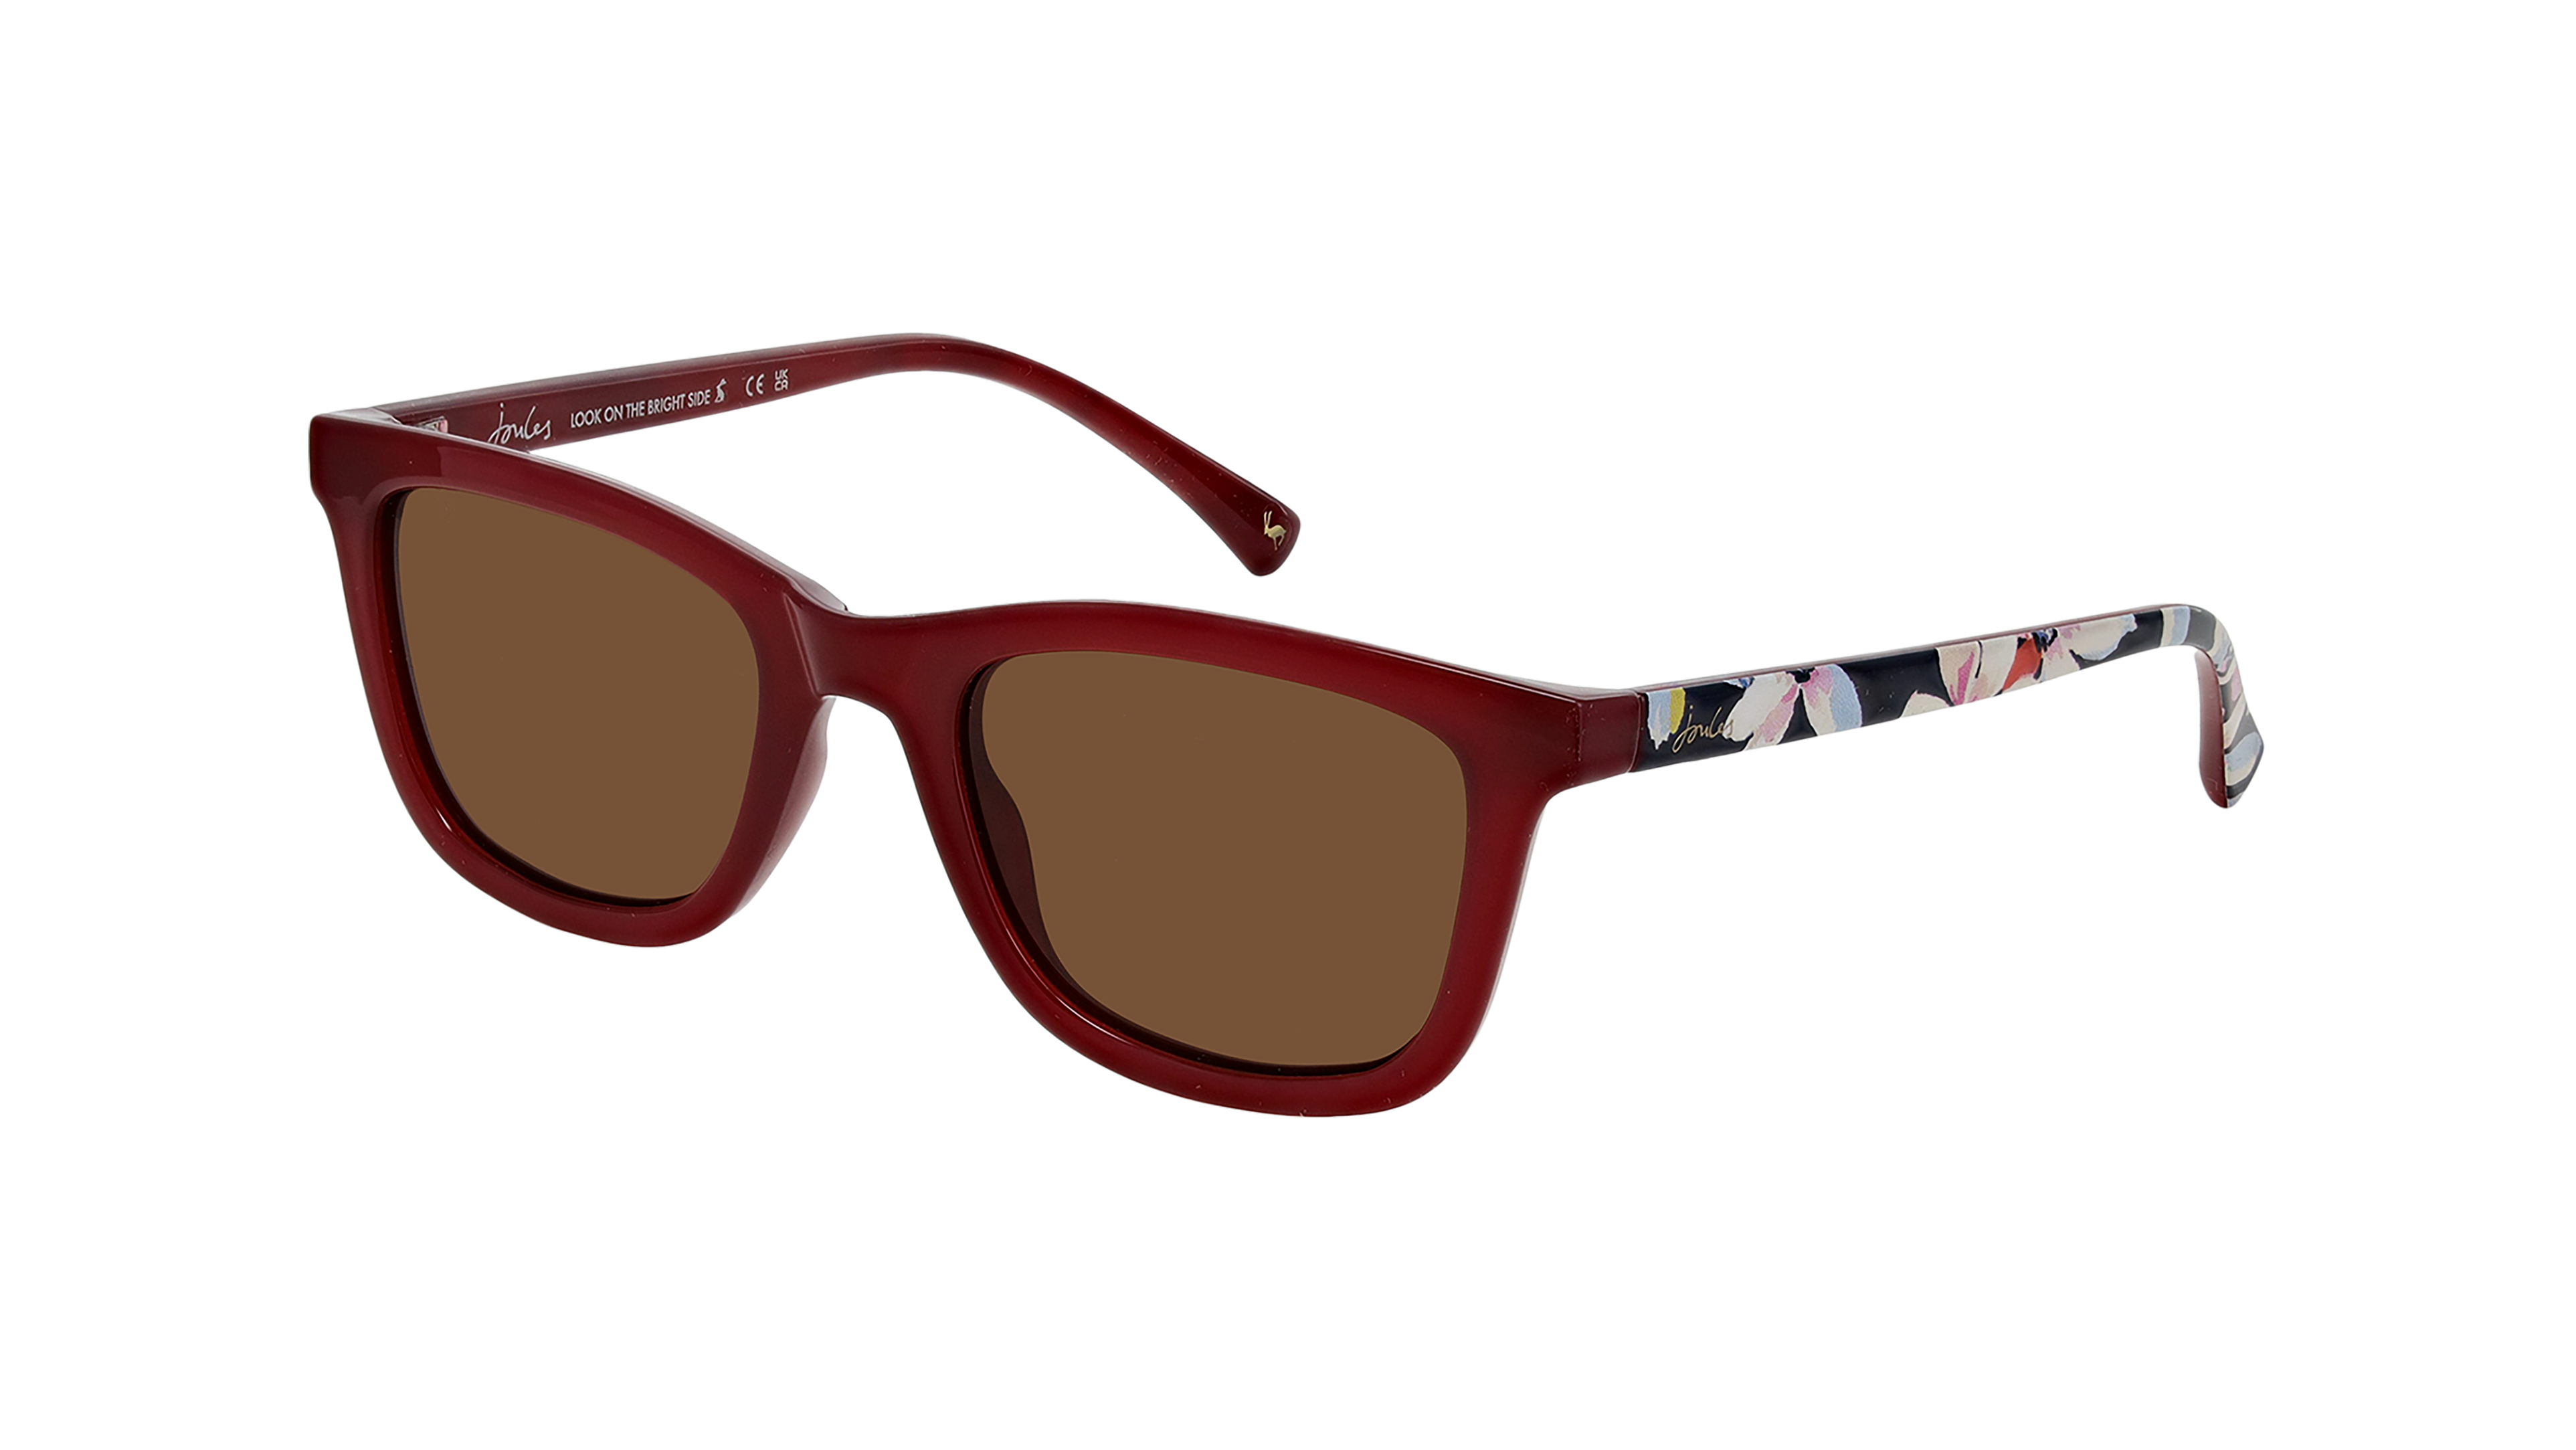 Angle_Left01 Joules JS 7074 Sunglasses Brown / Red